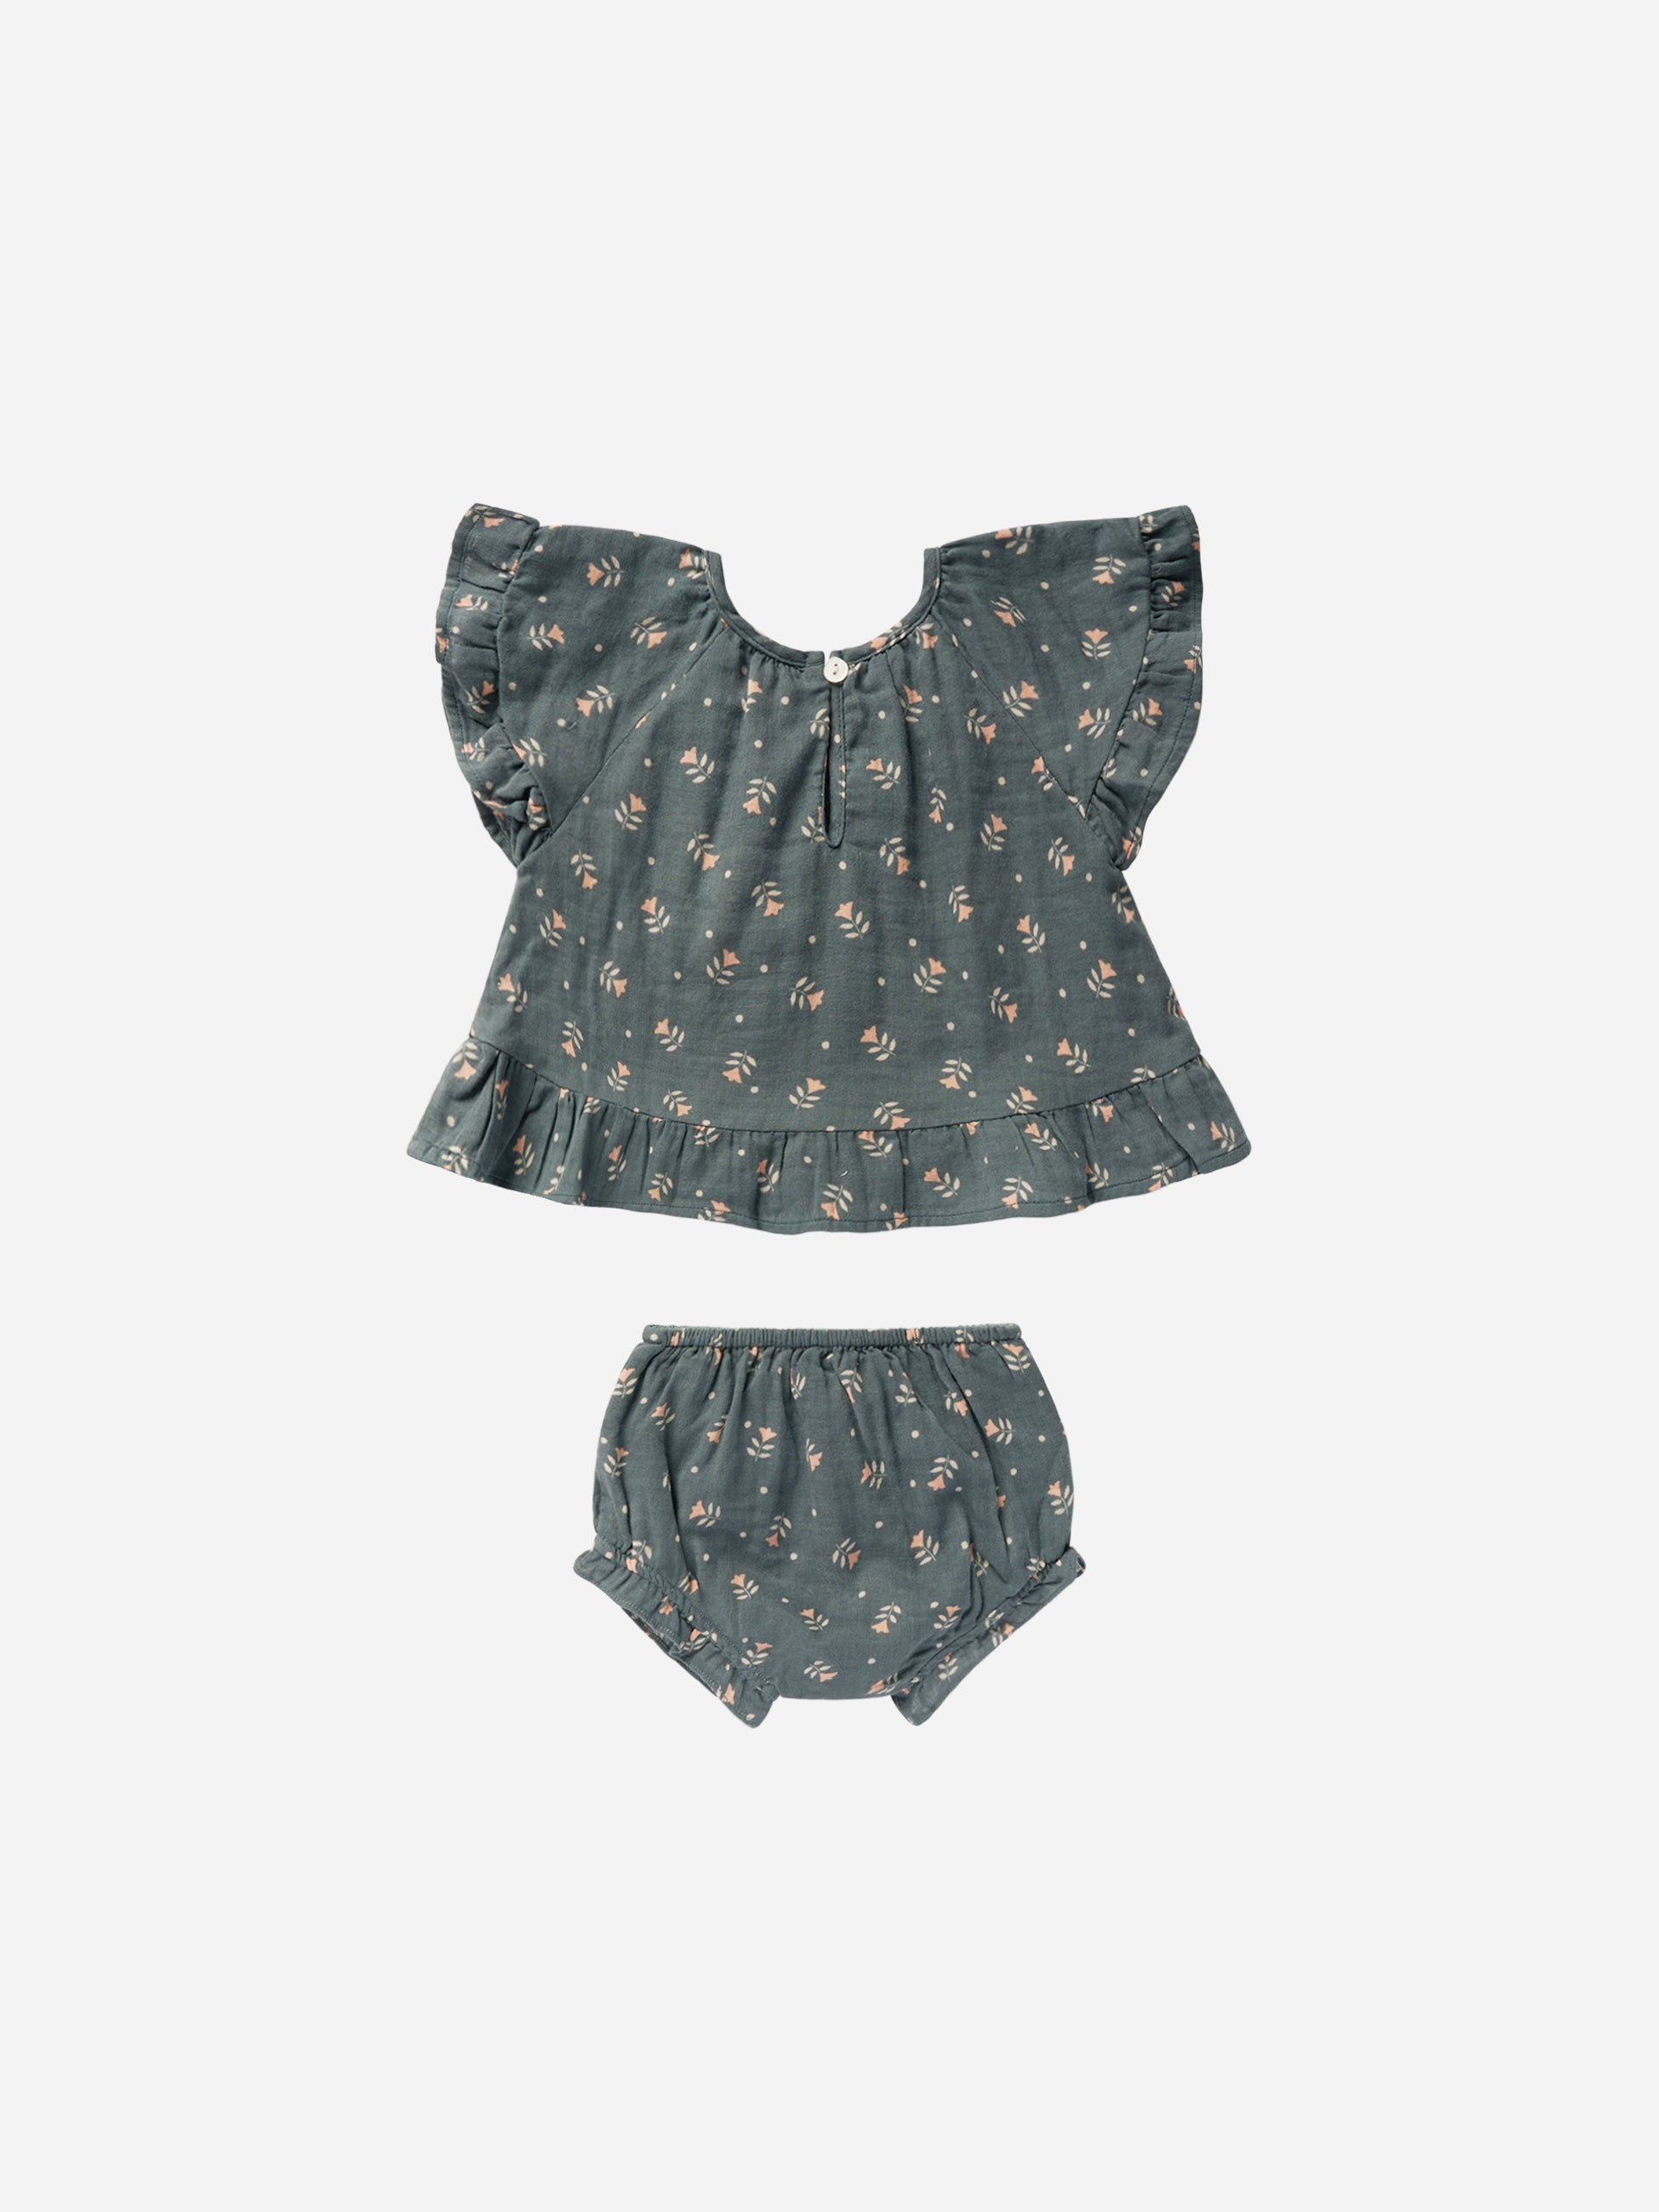 Butterfly Top + Bloomer Set || Morning Glory - Rylee + Cru | Kids Clothes | Trendy Baby Clothes | Modern Infant Outfits |